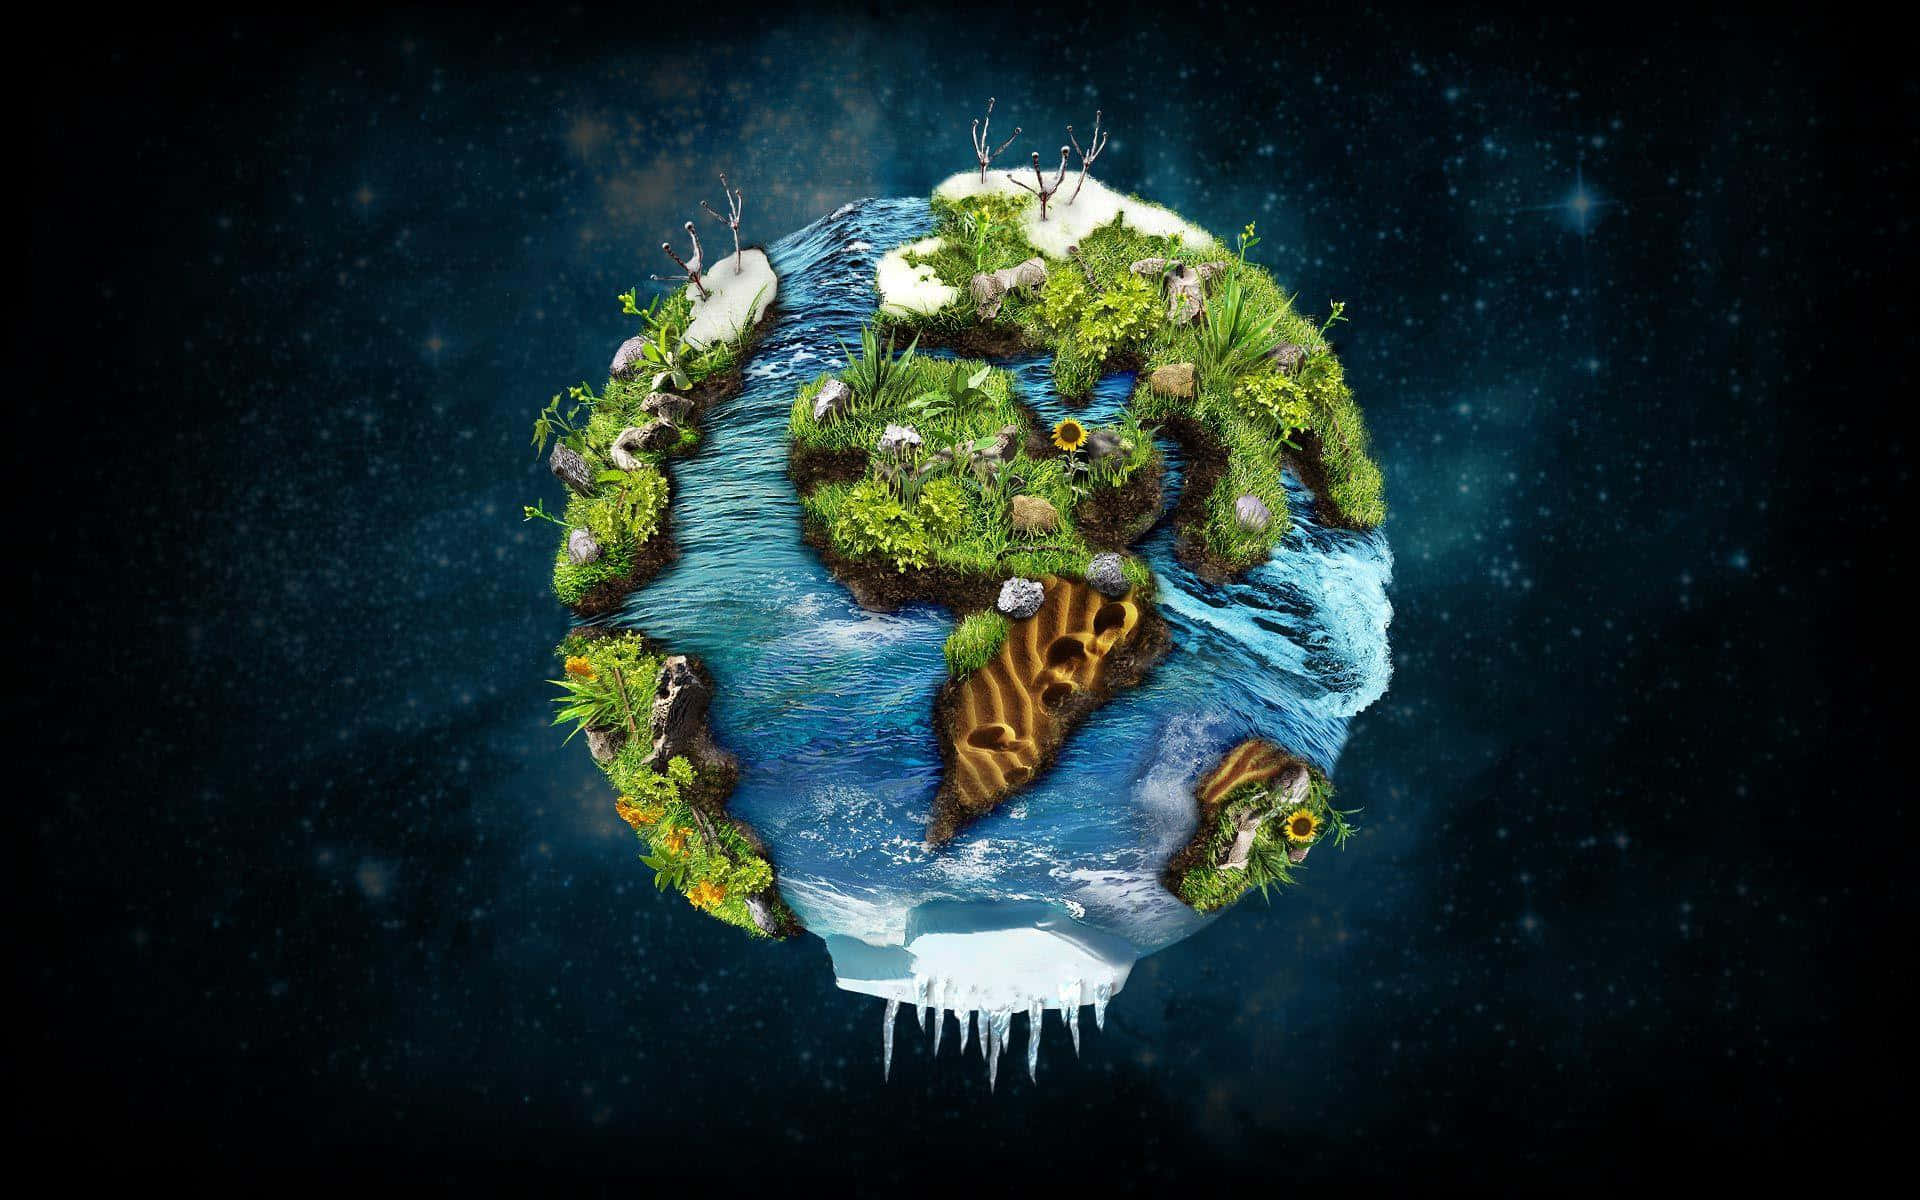 Earth Background Wallpaper